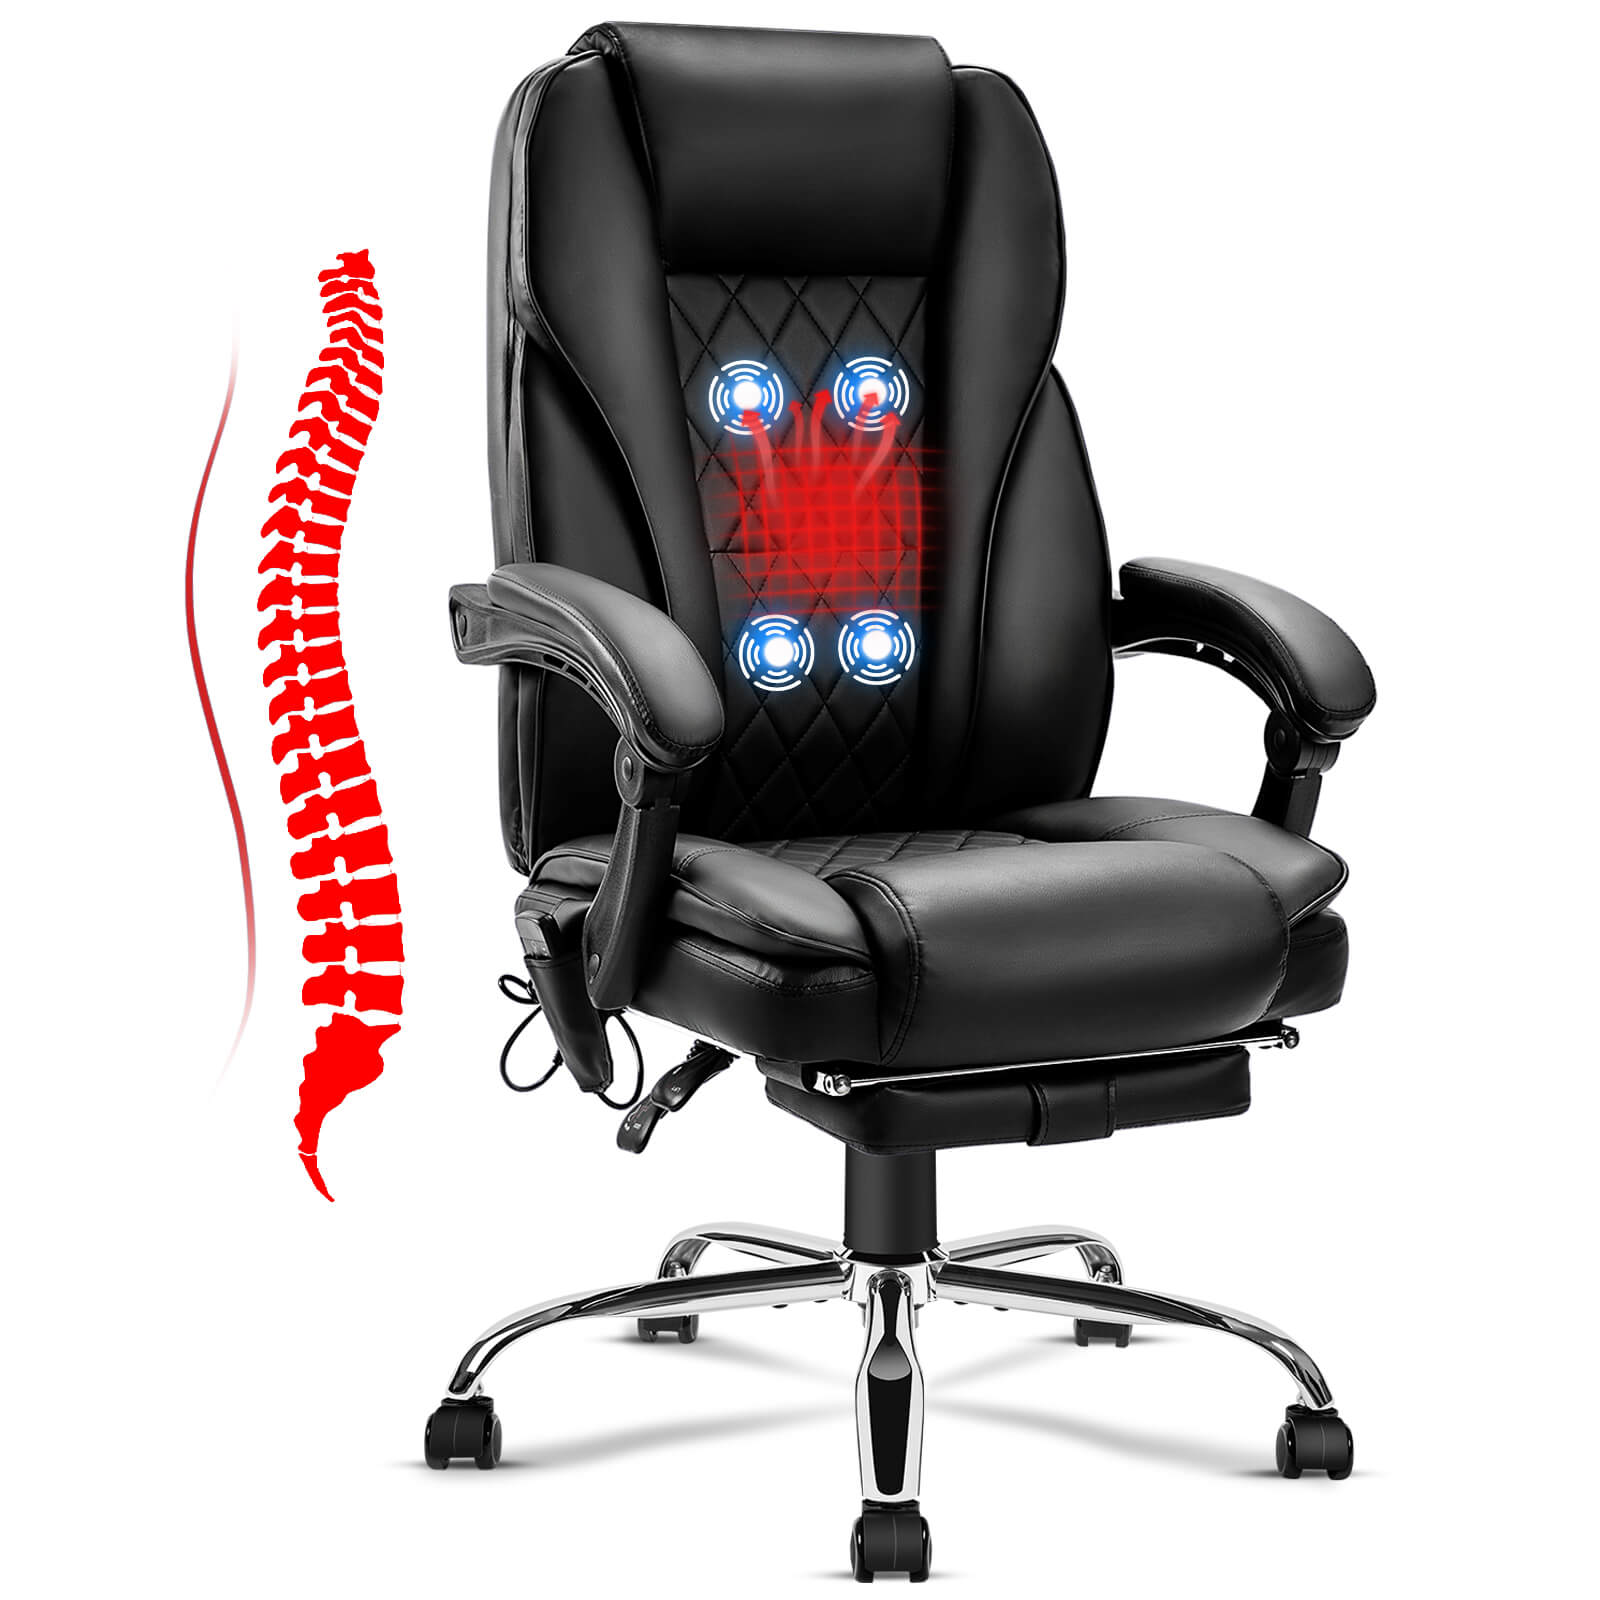 NOBLEMOOD High Back Office Chair Heated Executive Chair with 4 Points Massage, Swivel Ergonomic Desk Chair Breathable Big and Tall Reclining Chair